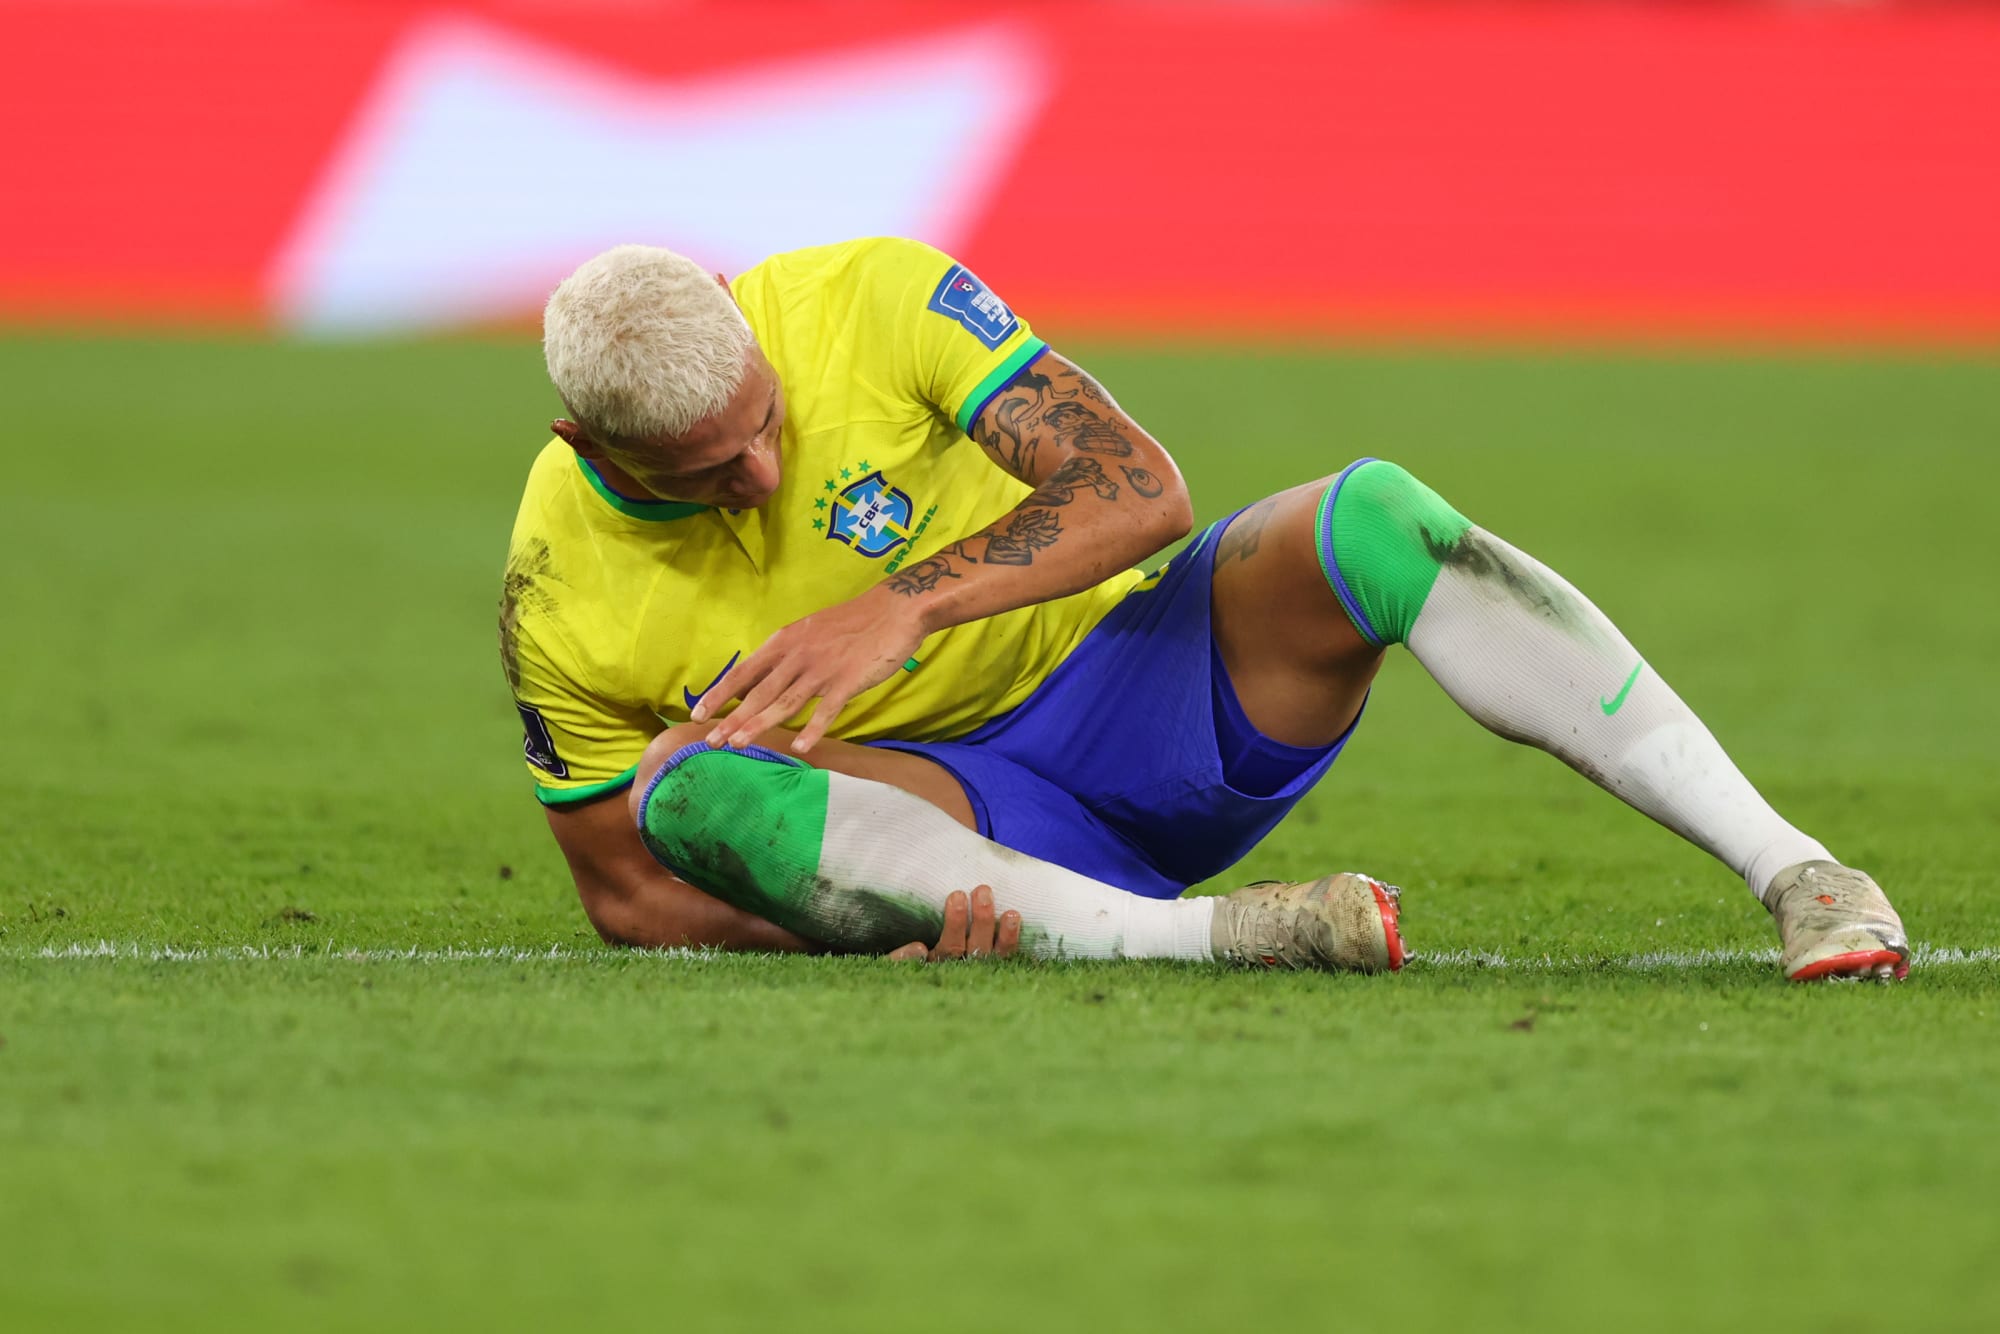 Post-World Cup injuries one question facing Tottenham Hotspur